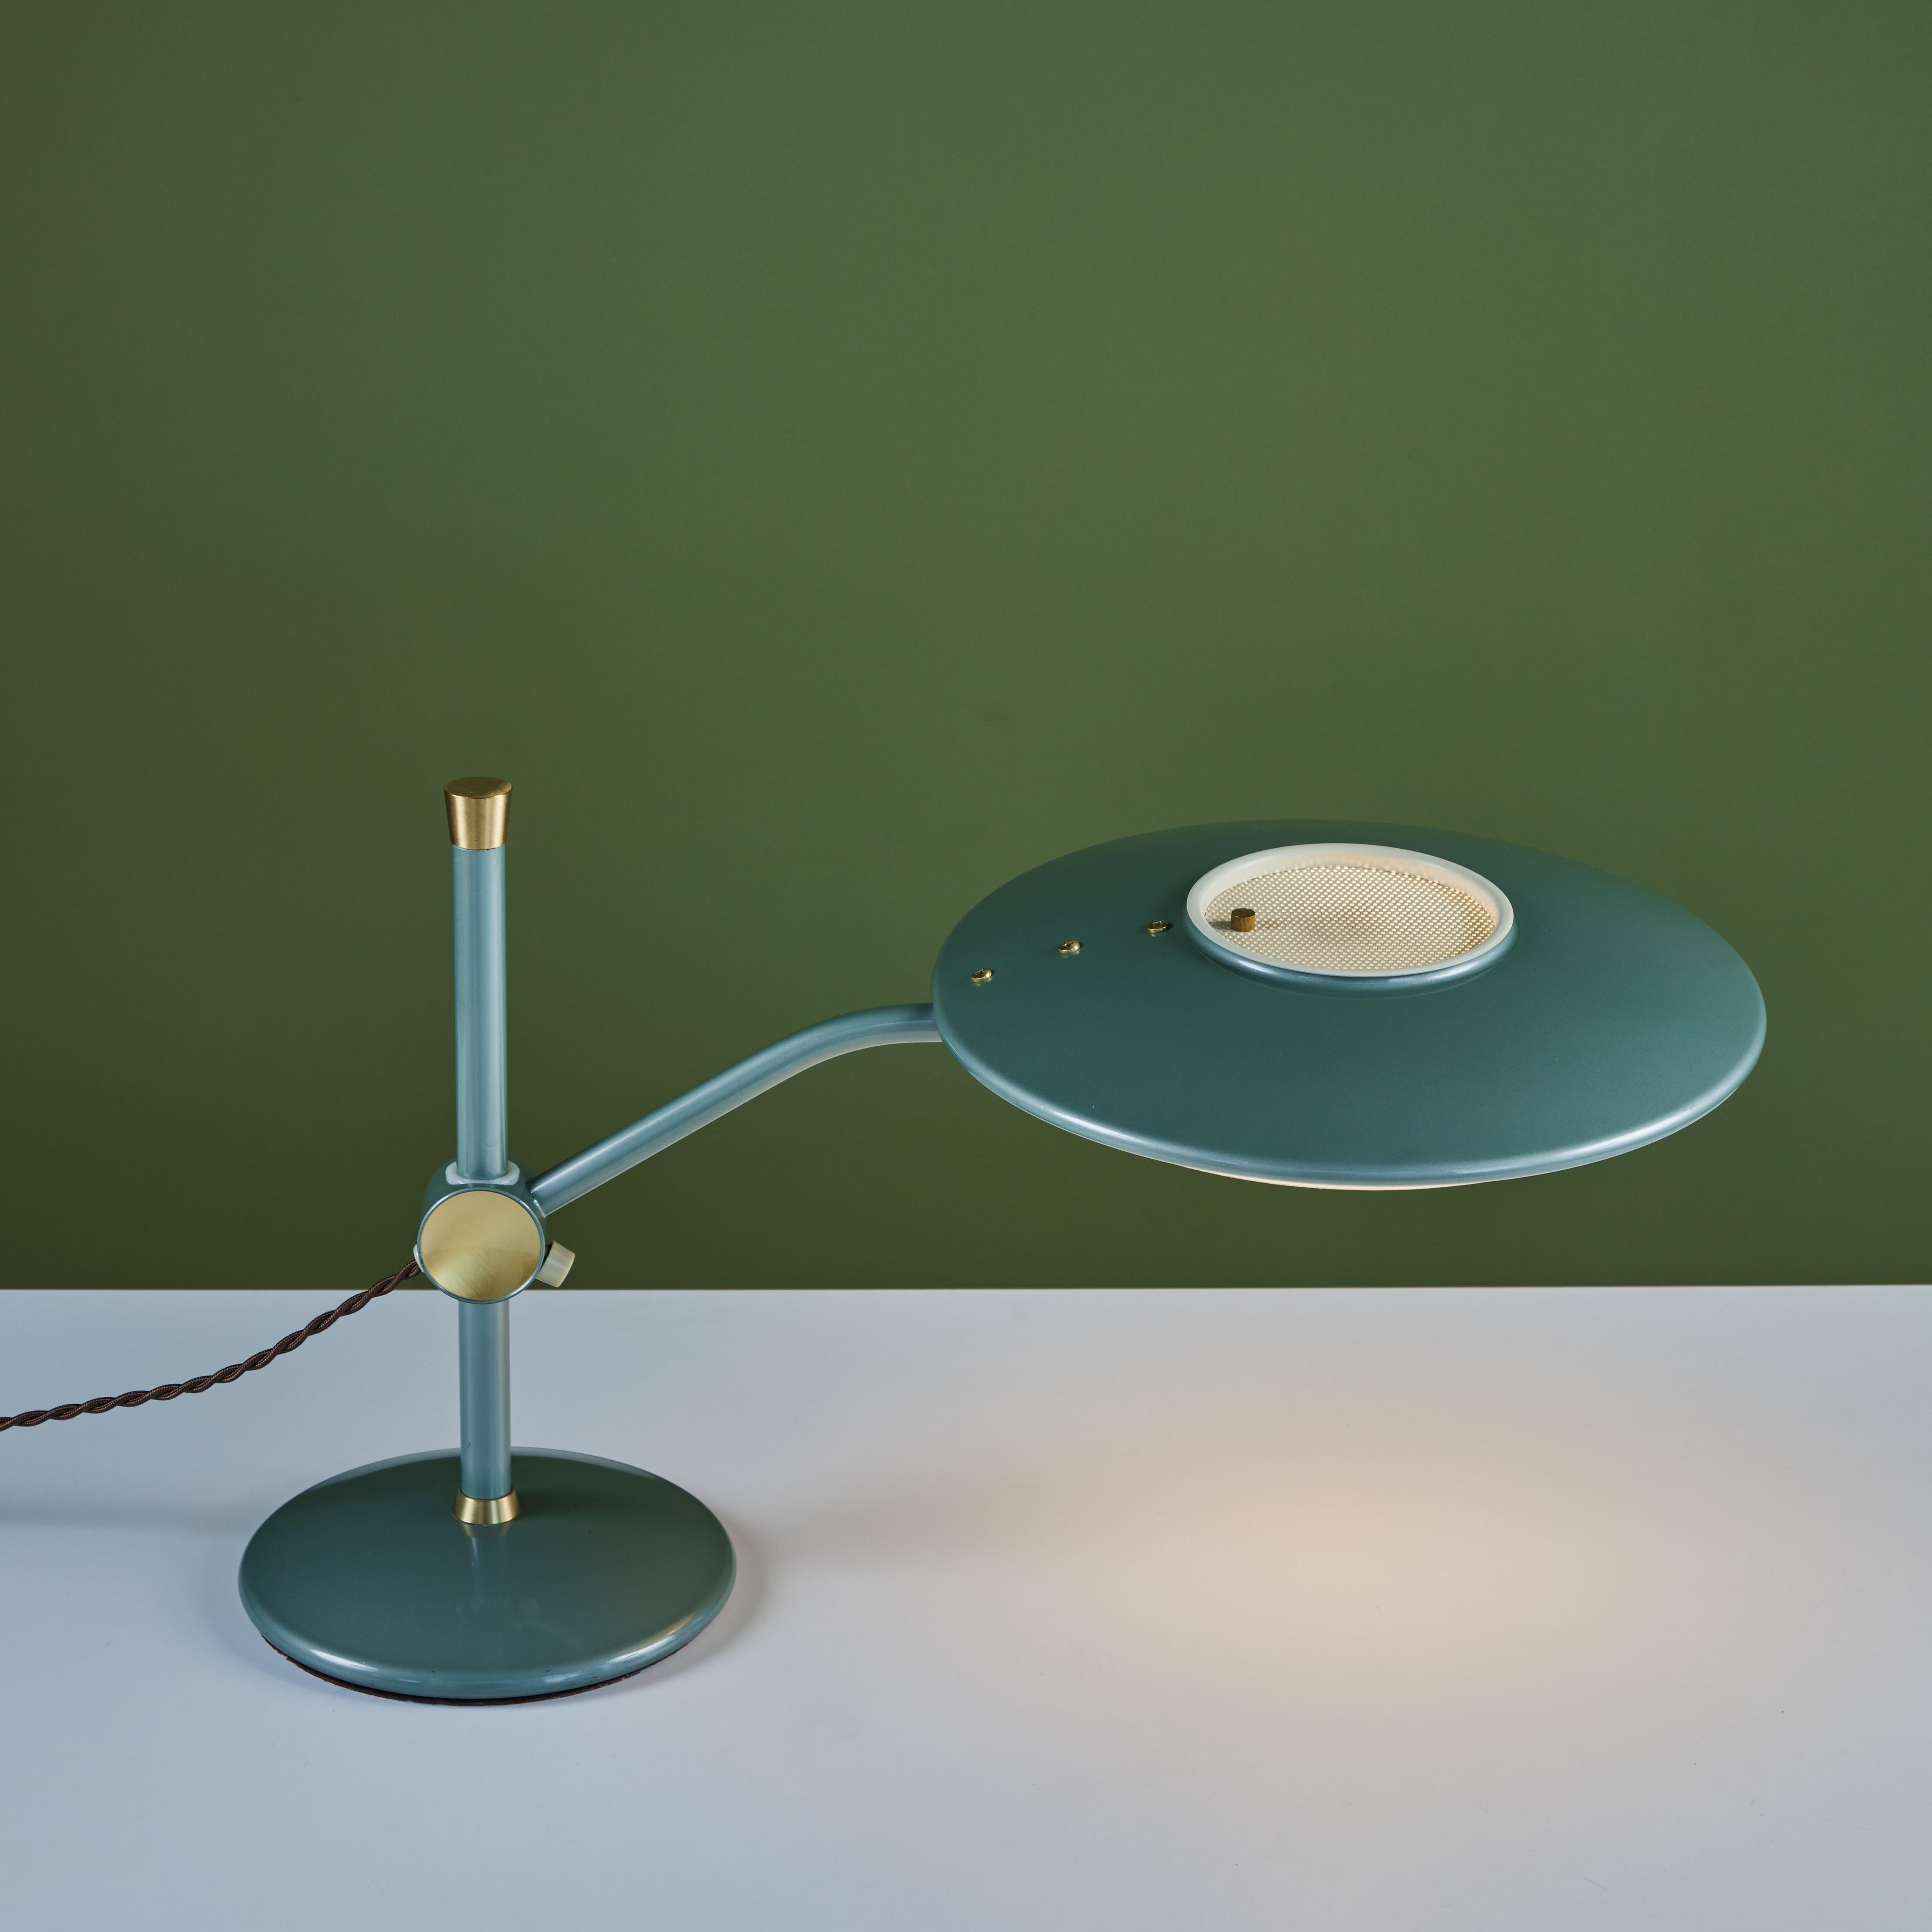 Dazor Green Enamel Desk Lamp with Brass Accents 2